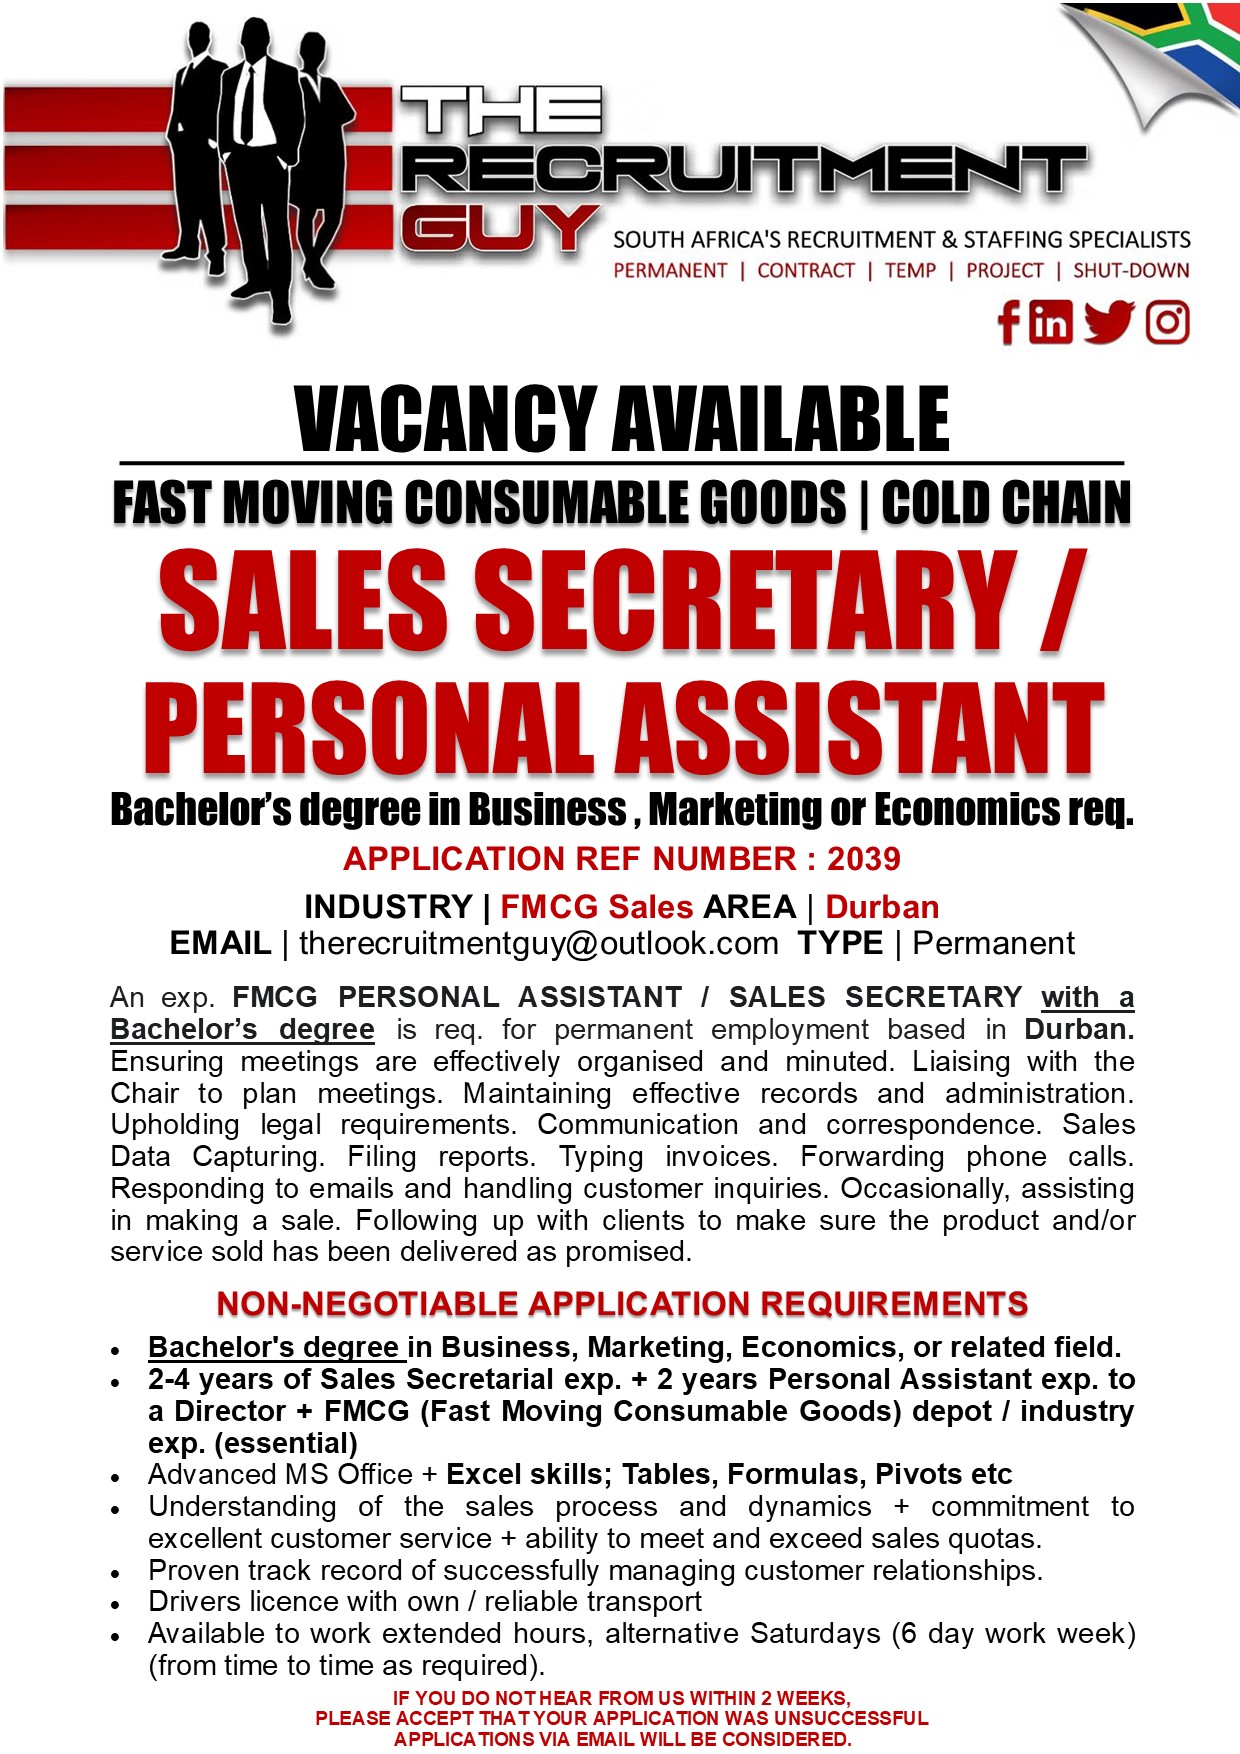 GUY SOUTH AFRICA'S RECRUITMENT &amp; STAFFING SPECIALISTS

PERMANENT | CONTRACT | TEMP | PROJECT | SHUT-DOWN

FOYE
VACANCY AVAILABLE
FAST MOVING CONSUMABLE GOODS | COLD CHAIN

SALES SECRETARY /
PERSONAL ASSISTANT

Bachelor's degree in Business, Marketing or Economics req.
APPLICATION REF NUMBER : 2039

INDUSTRY | FMCG Sales AREA | Durban
EMAIL | therecruitmentguy@outlook.com TYPE | Permanent

An exp. FMCG PERSONAL ASSISTANT / SALES SECRETARY with a
Bachelor's degree is req. for permanent employment based in Durban.
Ensuring meetings are effectively organised and minuted. Liaising with the
Chair to plan meetings. Maintaining effective records and administration
Upholding legal requirements. Communication and correspondence. Sales
Data Capturing. Filing reports. Typing invoices. Forwarding phone calls
Responding to emails and handling customer inquiries. Occasionally, assisting
in making a sale. Following up with clients to make sure the product and/or
service sold has been delivered as promised

NON-NEGOTIABLE APPLICATION REQUIREMENTS

« Bachelor's degree in Business, Marketing, Economics, or related field.

« 2-4 years of Sales Secretarial exp. + 2 years Personal Assistant exp. to
a Director + FMCG (Fast Moving Consumable Goods) depot / industry
exp. (essential)

« Advanced MS Office + Excel skills; Tables, Formulas, Pivots etc

« Understanding of the sales process and dynamics + commitment to
excellent customer service + ability to meet and exceed sales quotas

« Proven track record of successfully managing customer relationships

« Drivers licence with own / reliable transport

« Available to work extended hours, alternative Saturdays (6 day work week)
(from time to time as required)

IF YOU DO NOTHEAR FROM US WITHIN 2 WEEKS,
PLEASE ACCEPT THAT YOUR APPLICATION WAS UNSUCCESSFUL
APPLICATIONS VIA EMAIL WILL BE CONSIDERED.